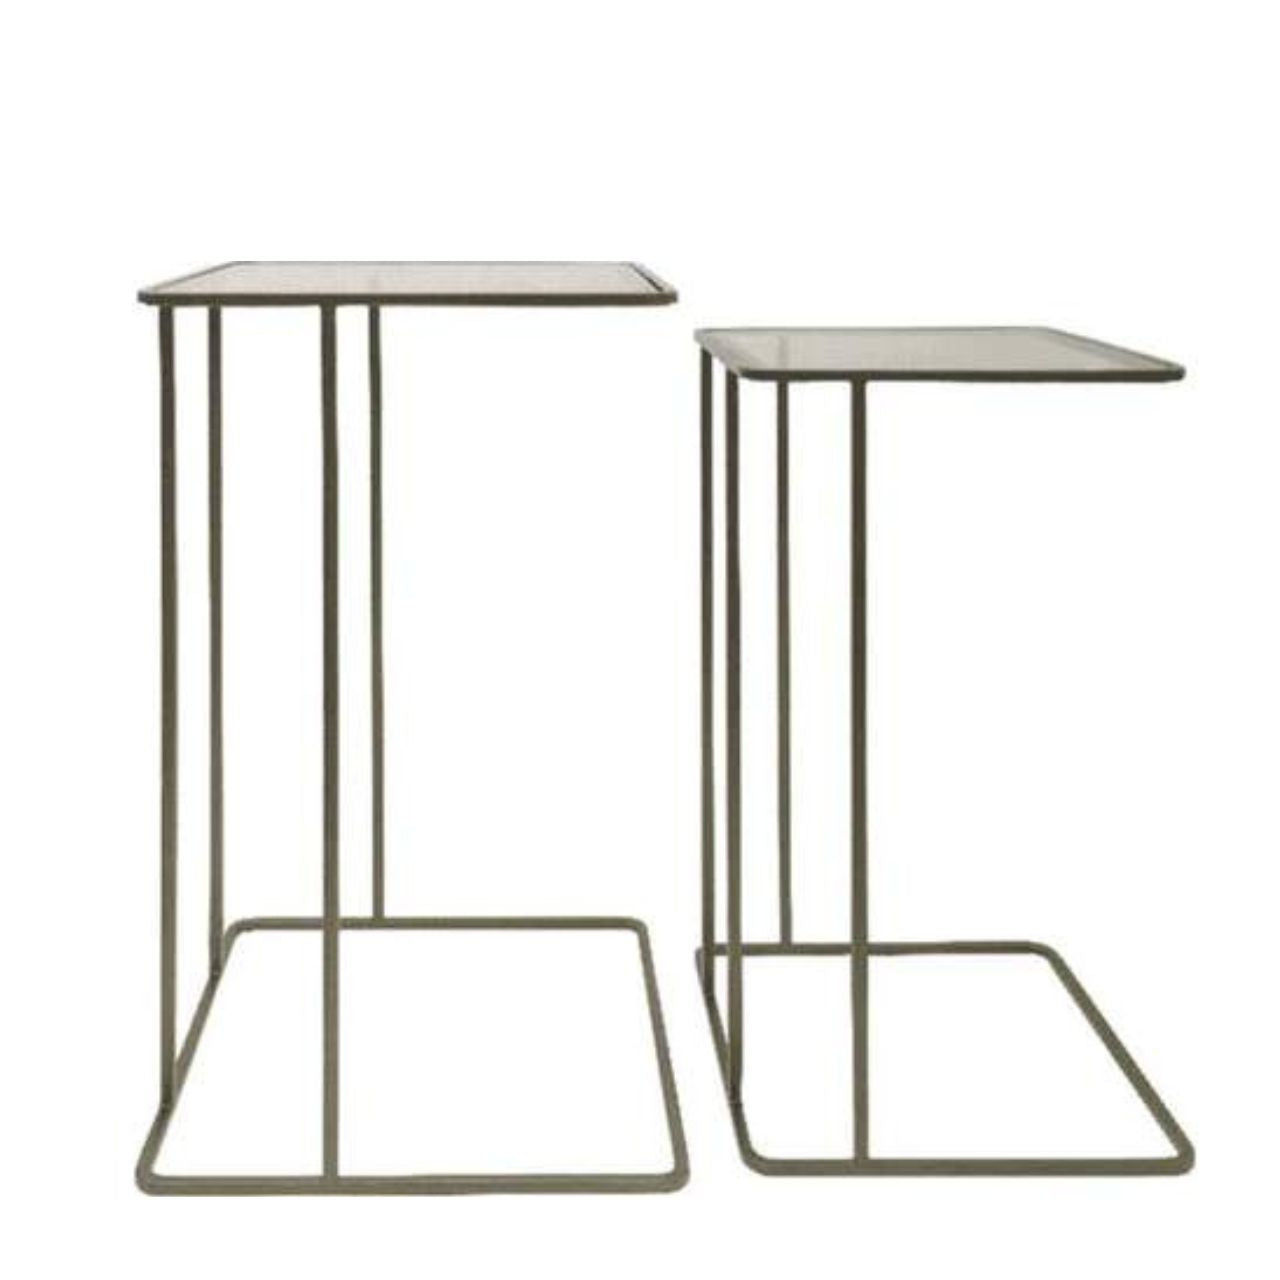 A sleek, contemporary set of 2 tables that elevates your living experience, this classic set of tables feature an elegant play of lines and geometry of frames.